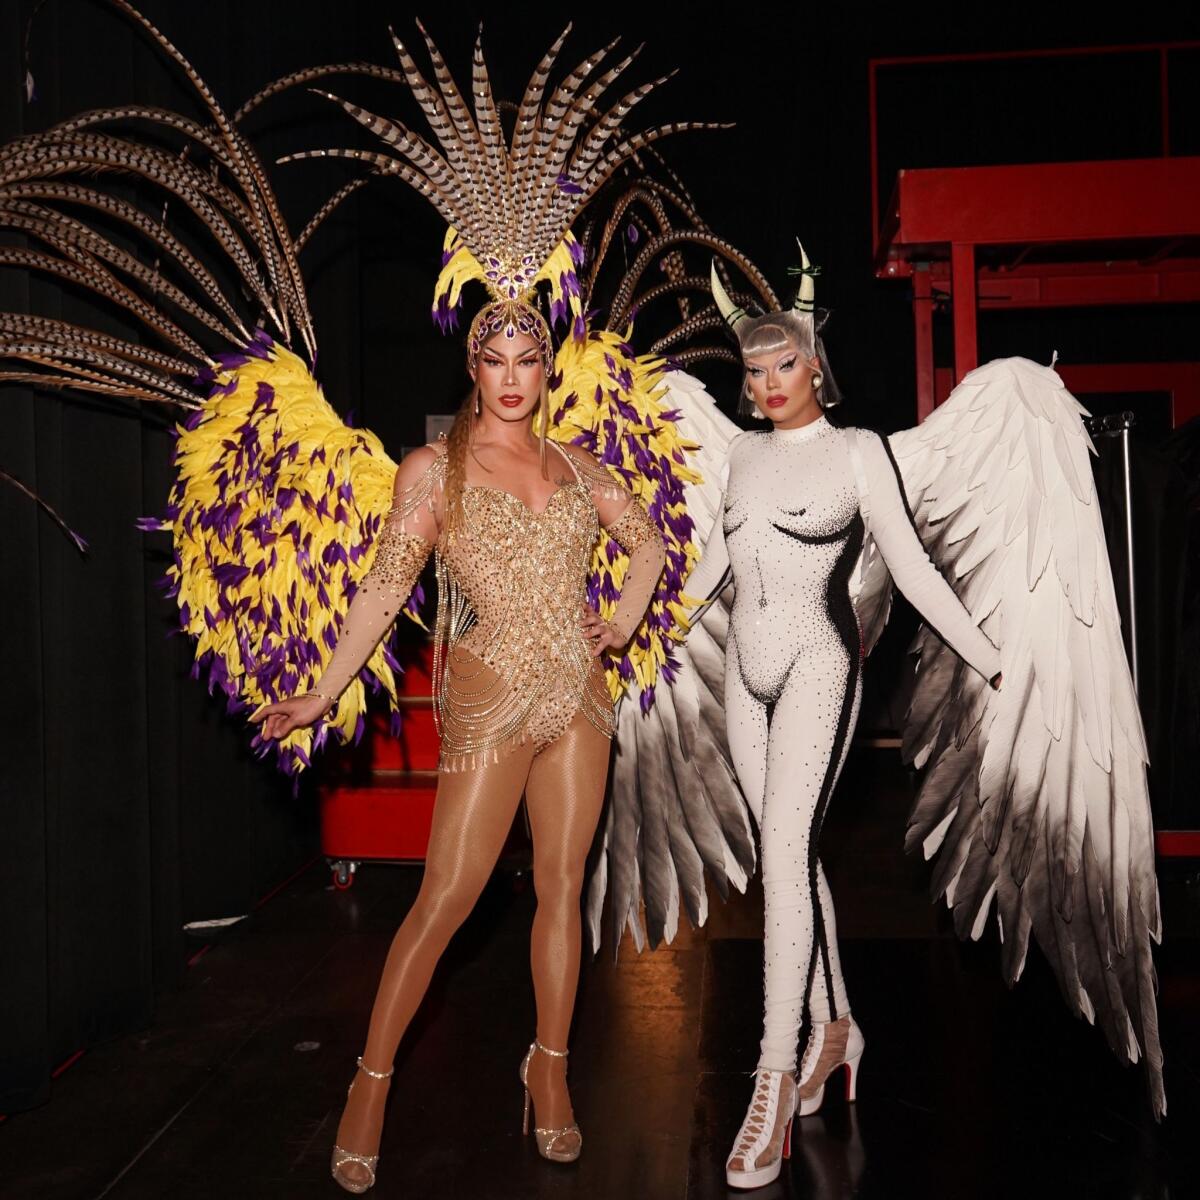 Pangina Heals and Nicky Doll, hosts of the Thai and French editions of "RuPaul's Drag Race."